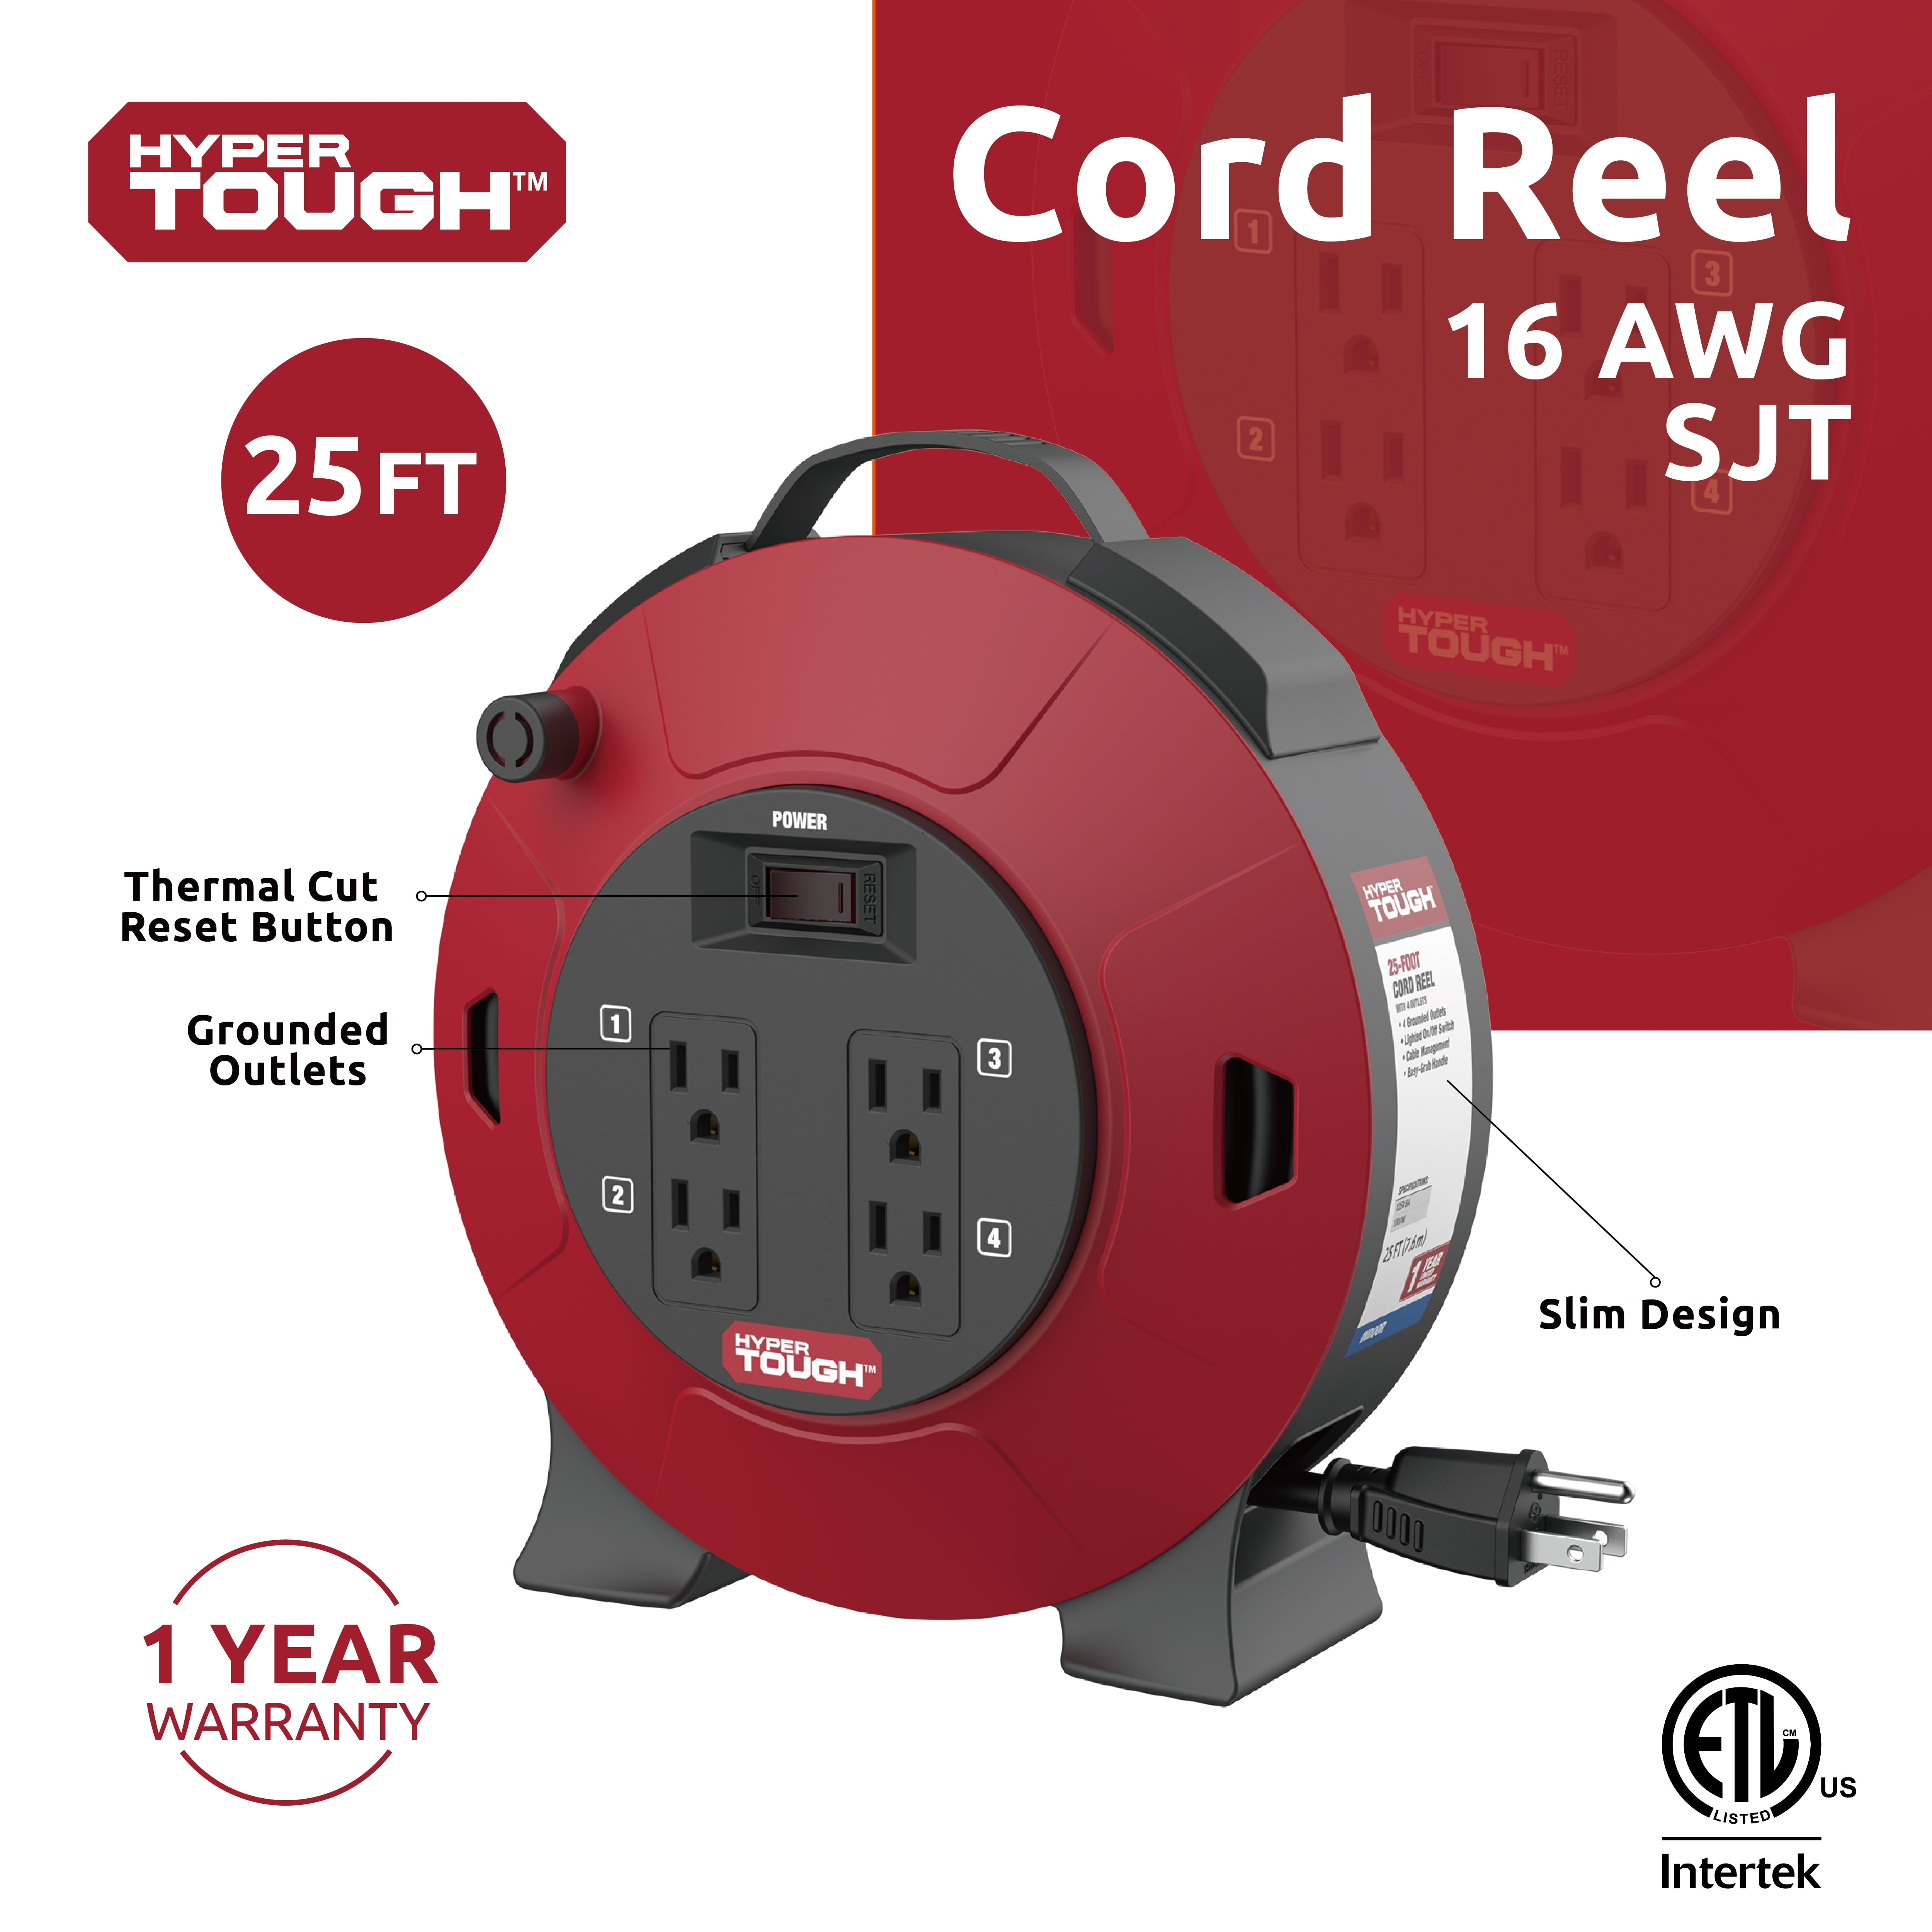 HYPER TOUGH 25 Ft. Retractable Extension Cord Reel With 4 Outlets,  Multi-Plug Extension, On/Off Switch & 16AWG SJT Cable, Black/Red 